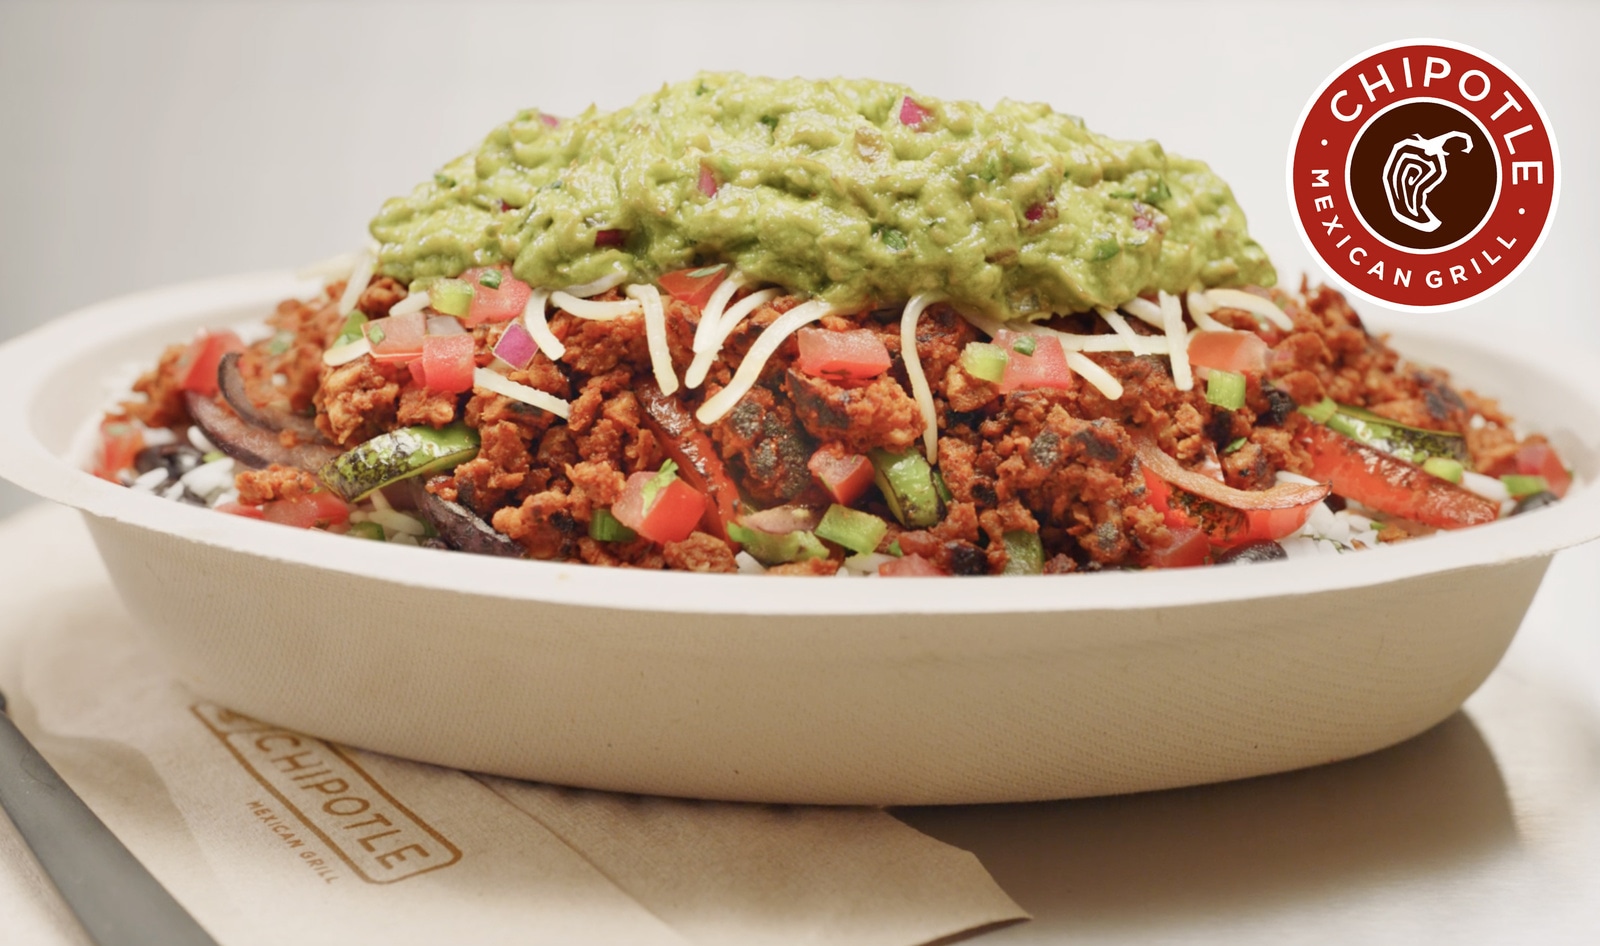 Chipotle Just Launched Vegan Chorizo Nationwide. Here's How to Get it Delivered.&nbsp;